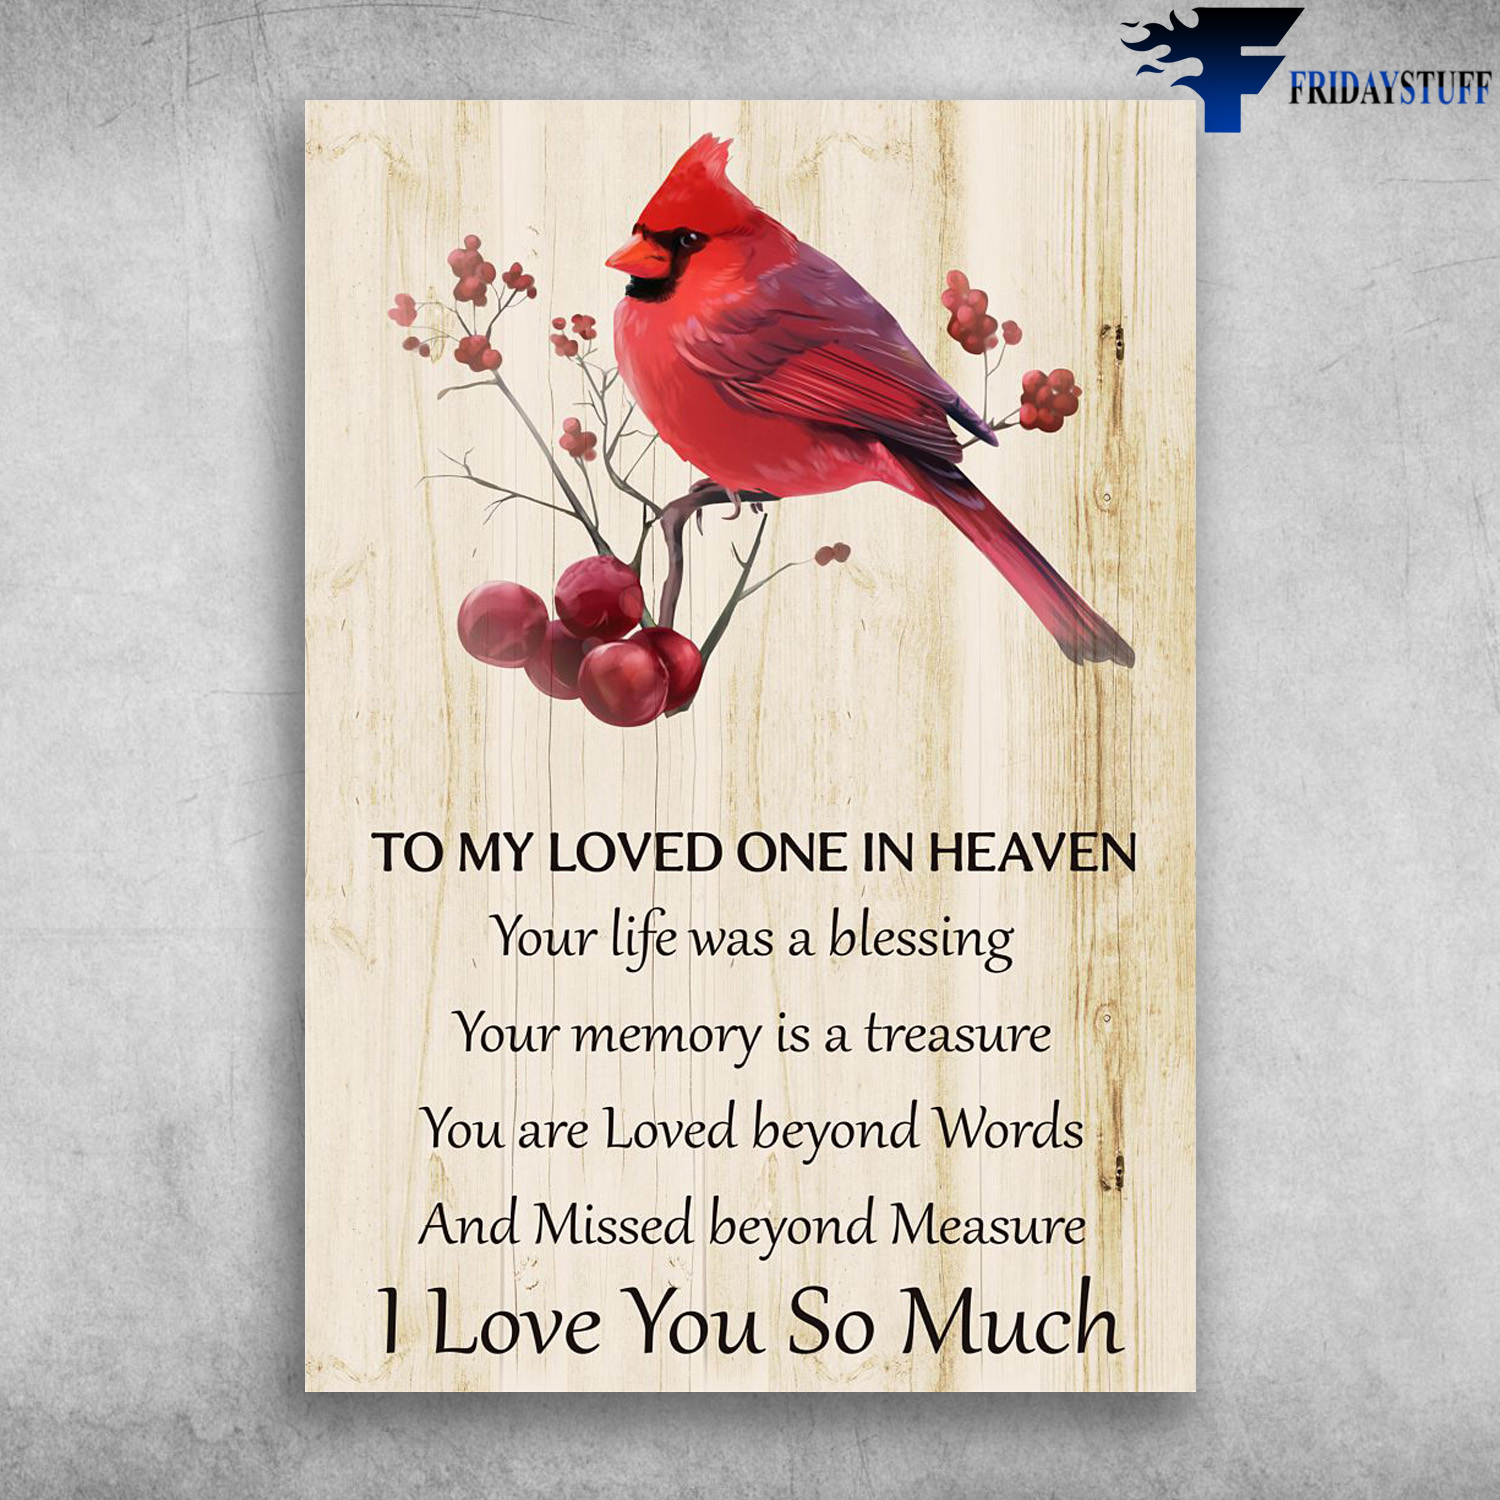 Cardinal Bird - To My Loved One In Heaven, You Life Was A Blessing, Your Memory Is A Treasure, You Are Loved Beyond Words, And Missed Beyond Measure, I Love You So Much